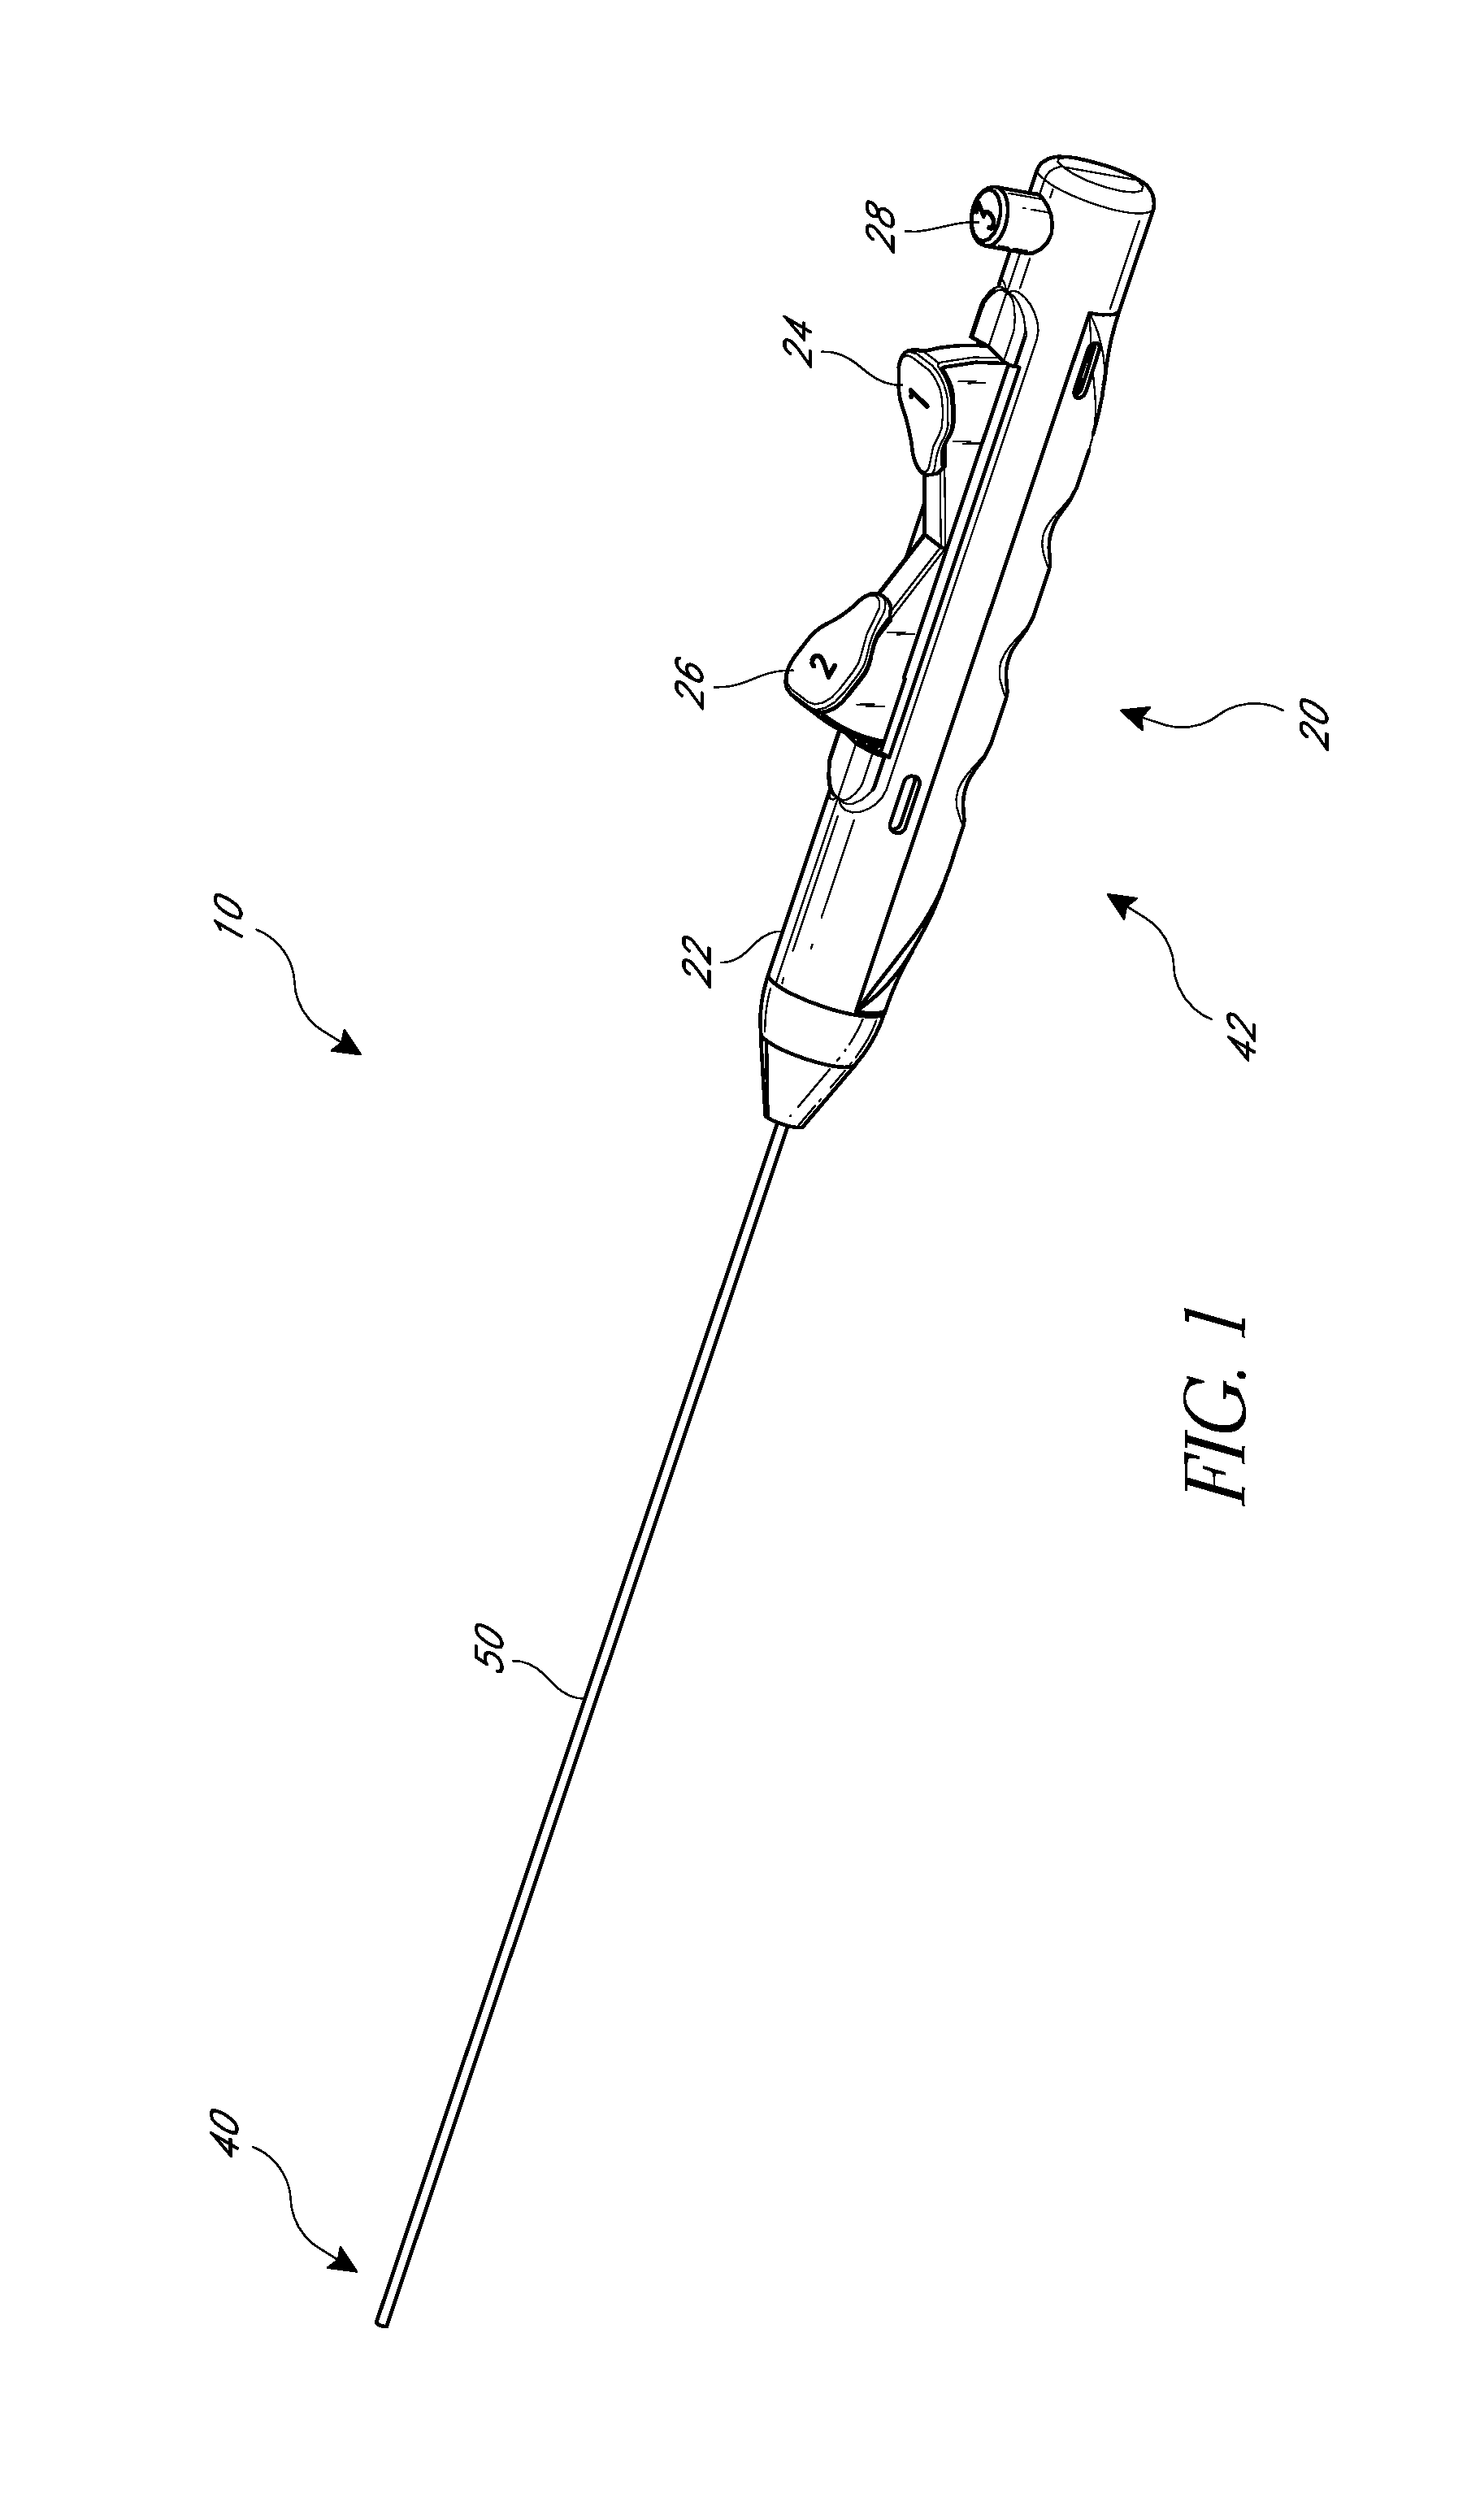 Suturing methods and apparatuses